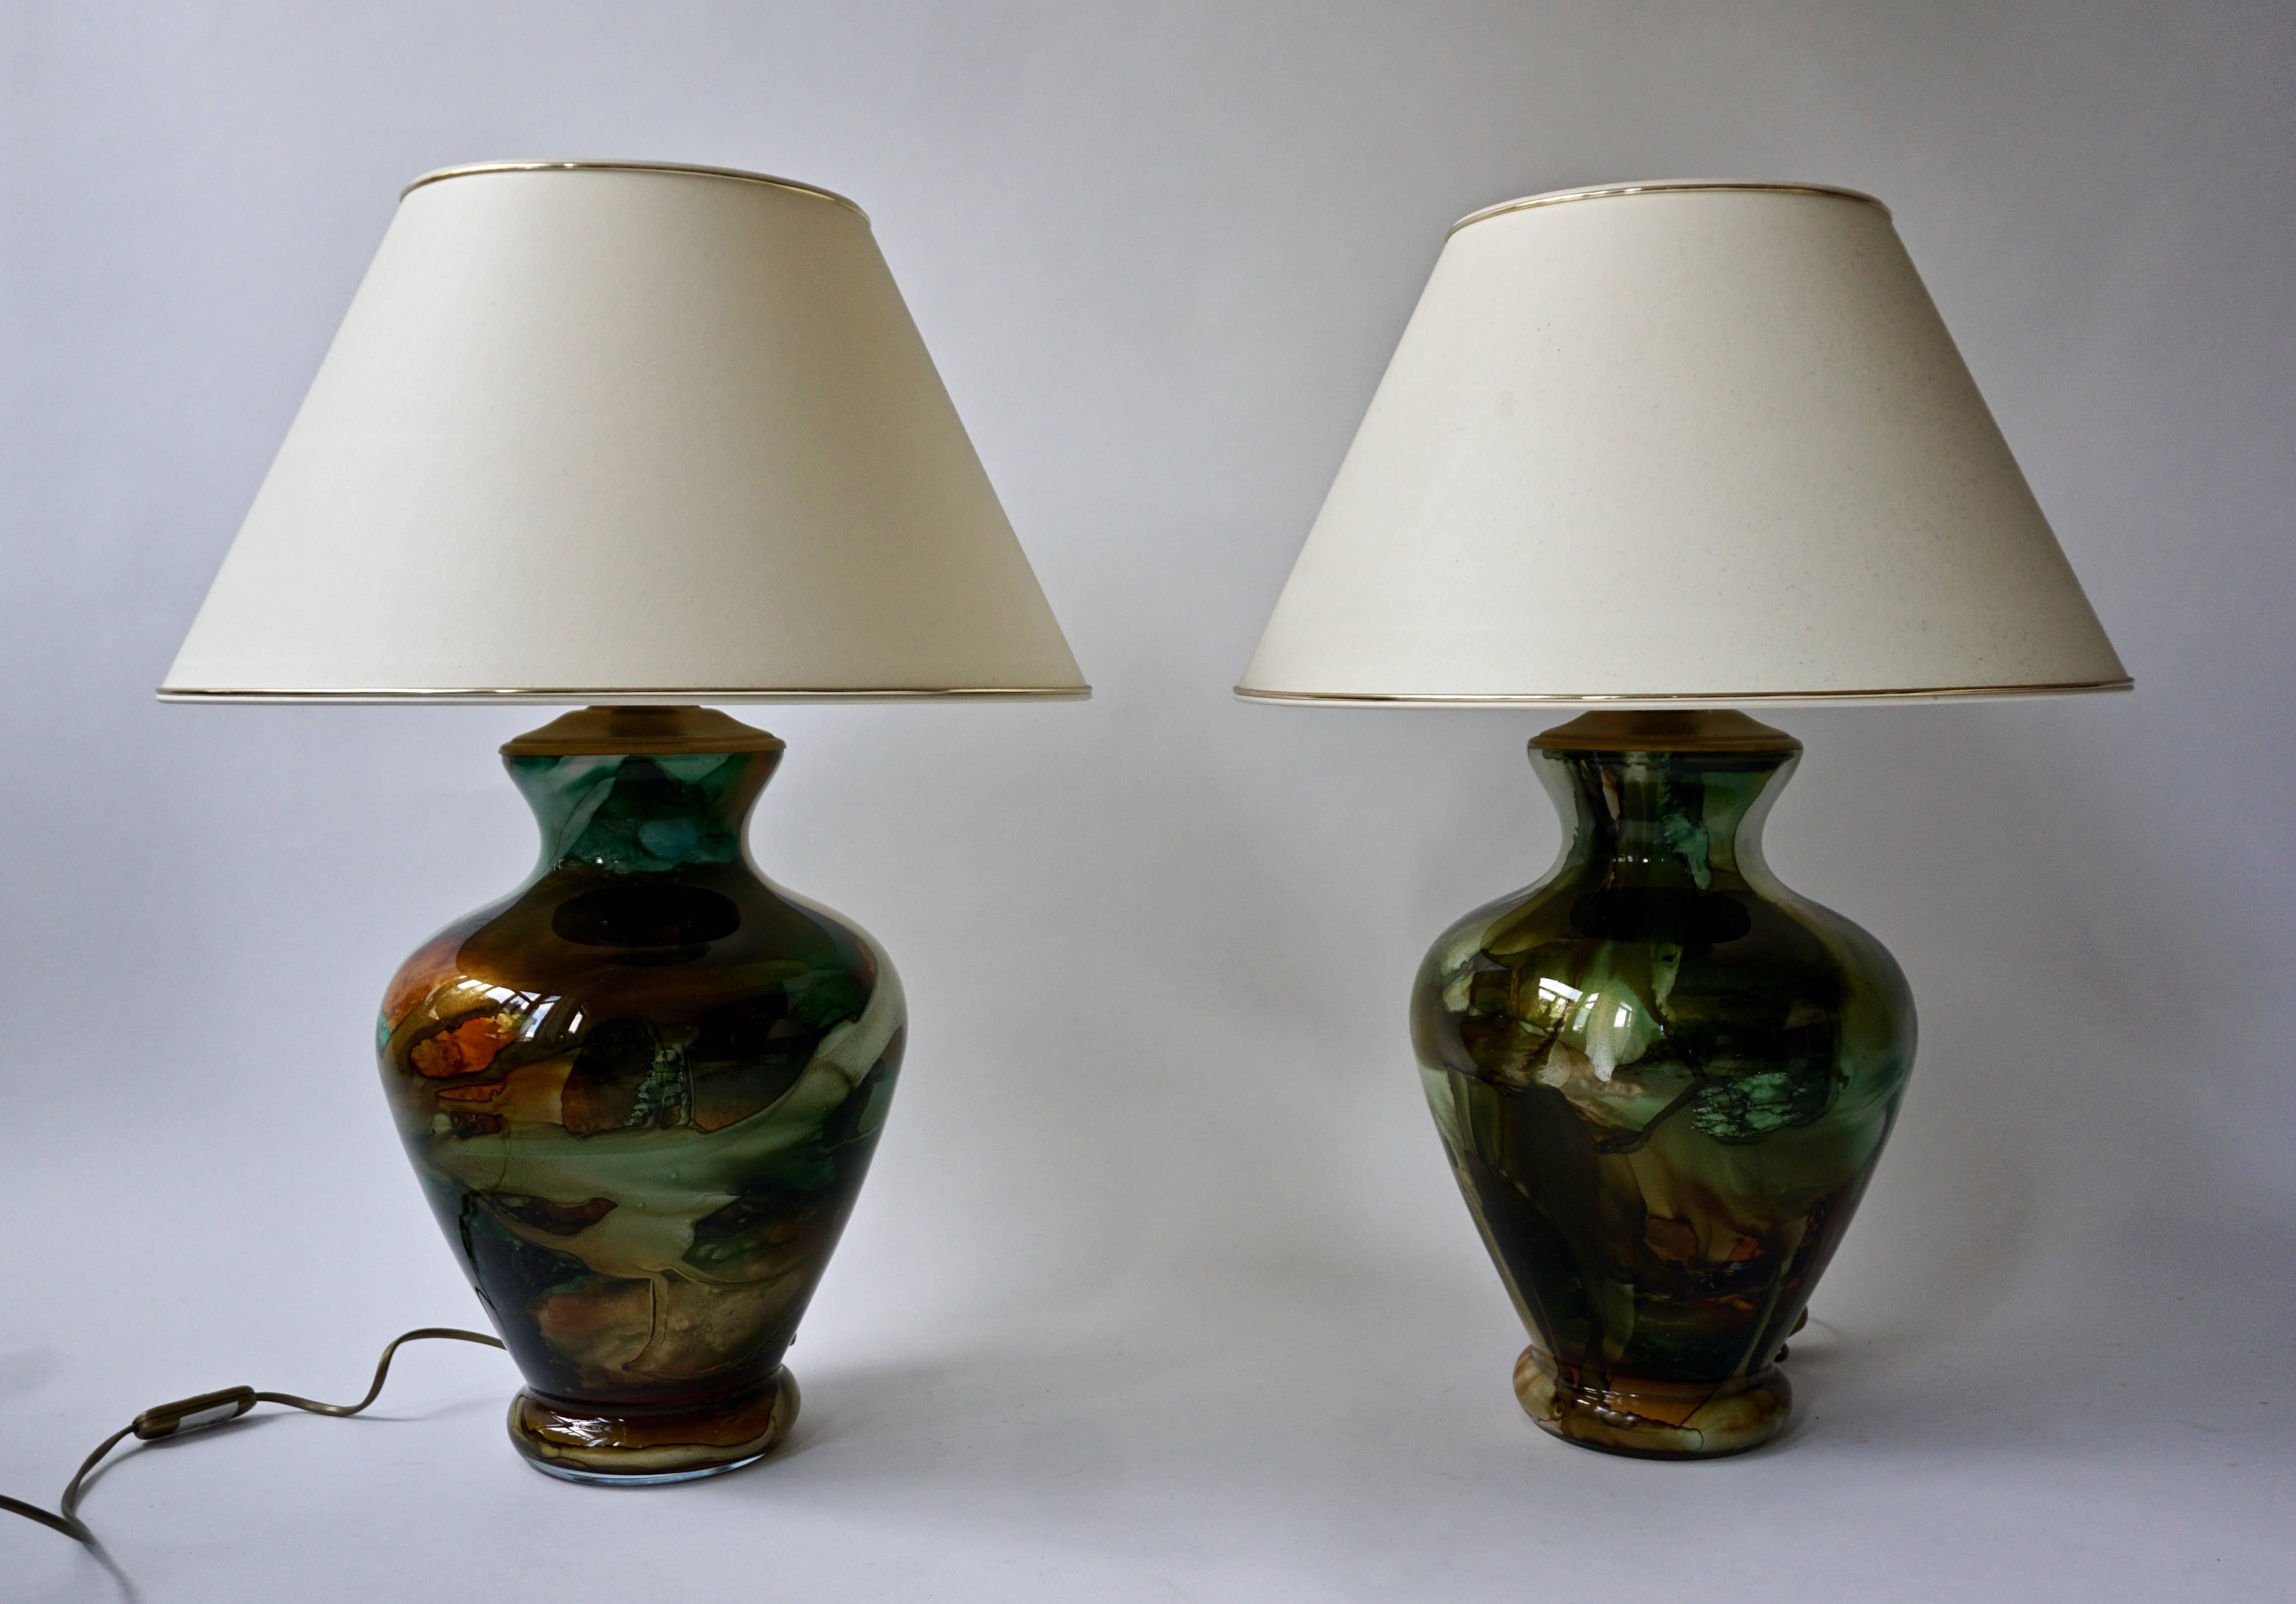 Two painted glass table lamps.
Diameter glass base: 26 cm.
Height glass base: 44 cm.
Height with shade: 64 cm.
Diameter shade: 46 cm.
The lamp shades are not included in the price.